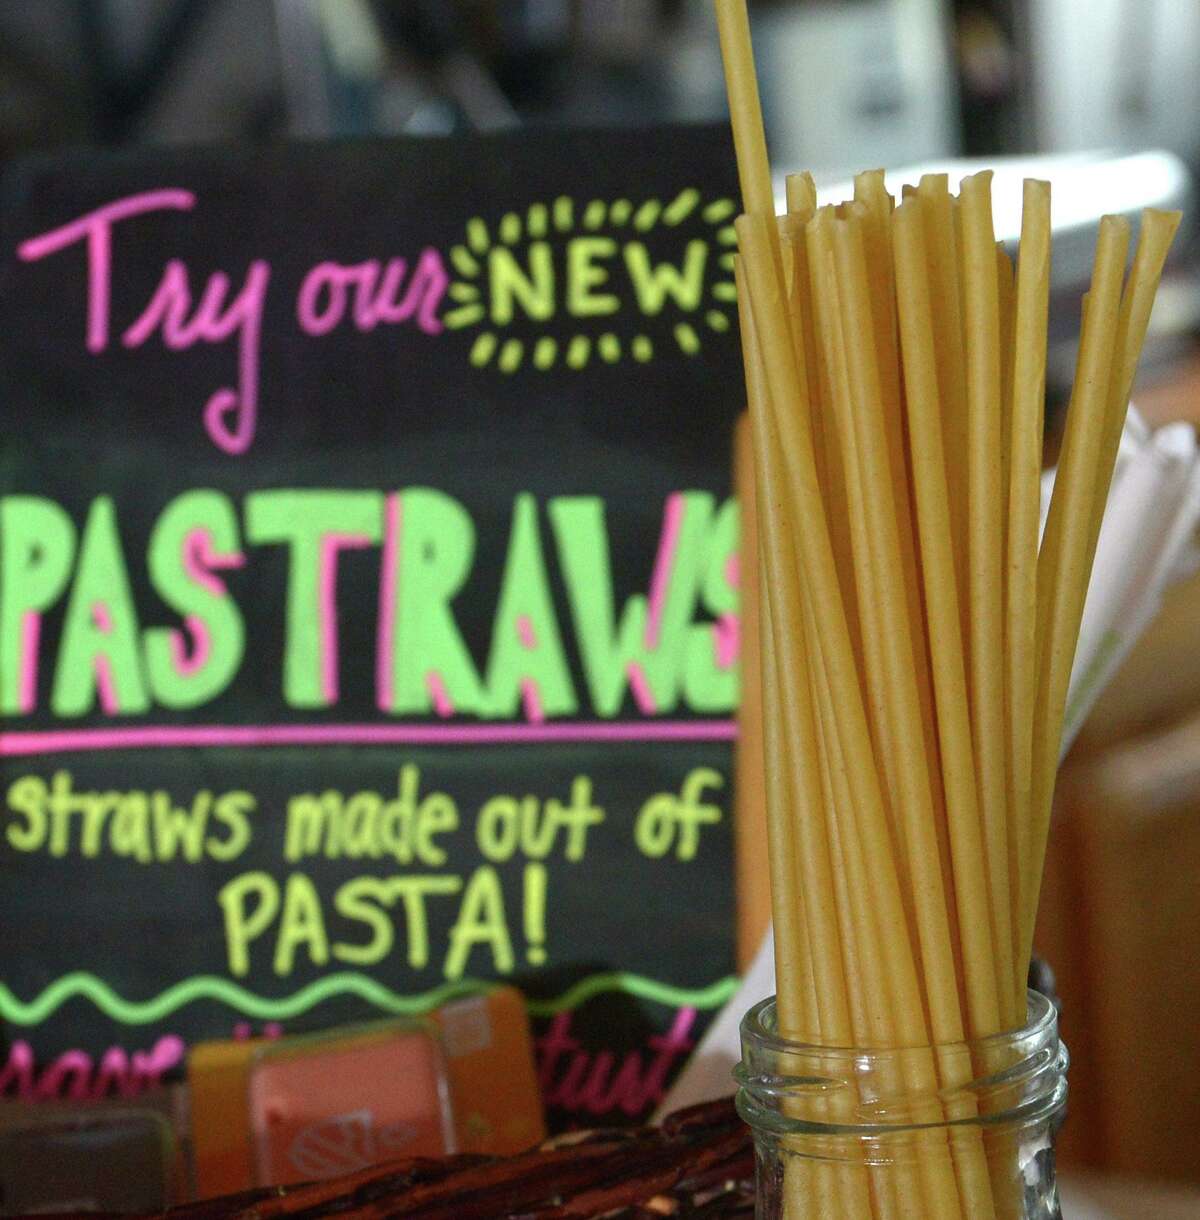 Plastic-free straws, like those pictured here, can be an issue for those with disabilities, officials said. Norwalk’s plans to ban single-use plastic straws are getting reviewed.